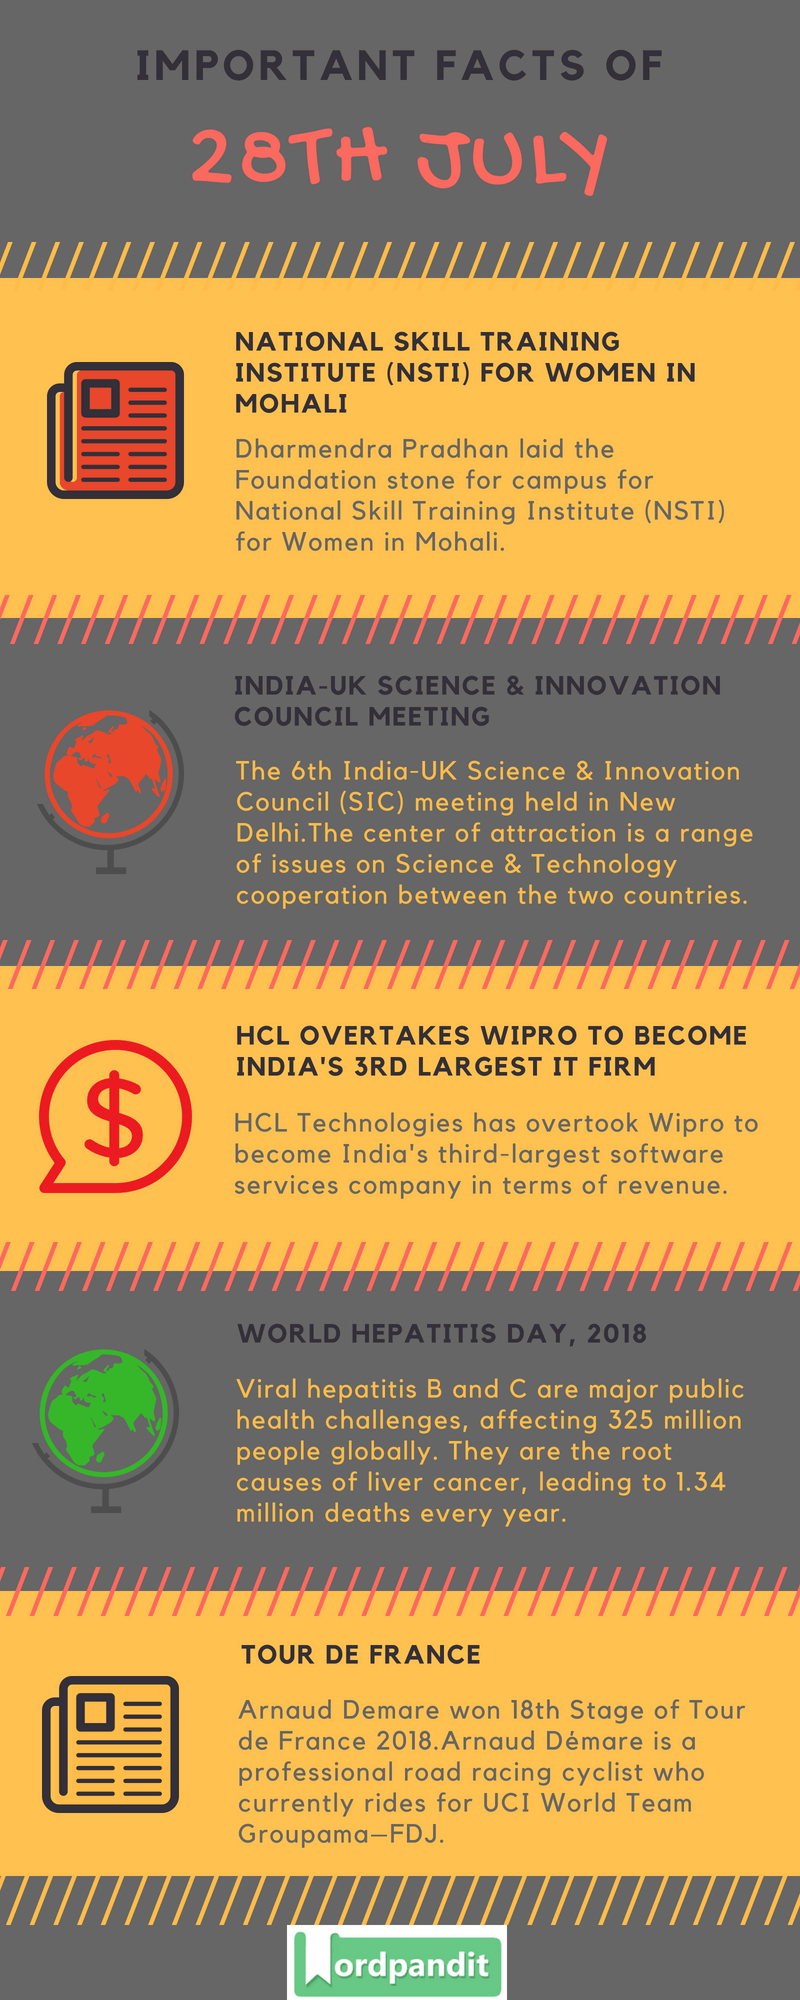 Daily Current Affairs 28 July 2018 Current Affairs Quiz July 28 2018 Current Affairs Infographic